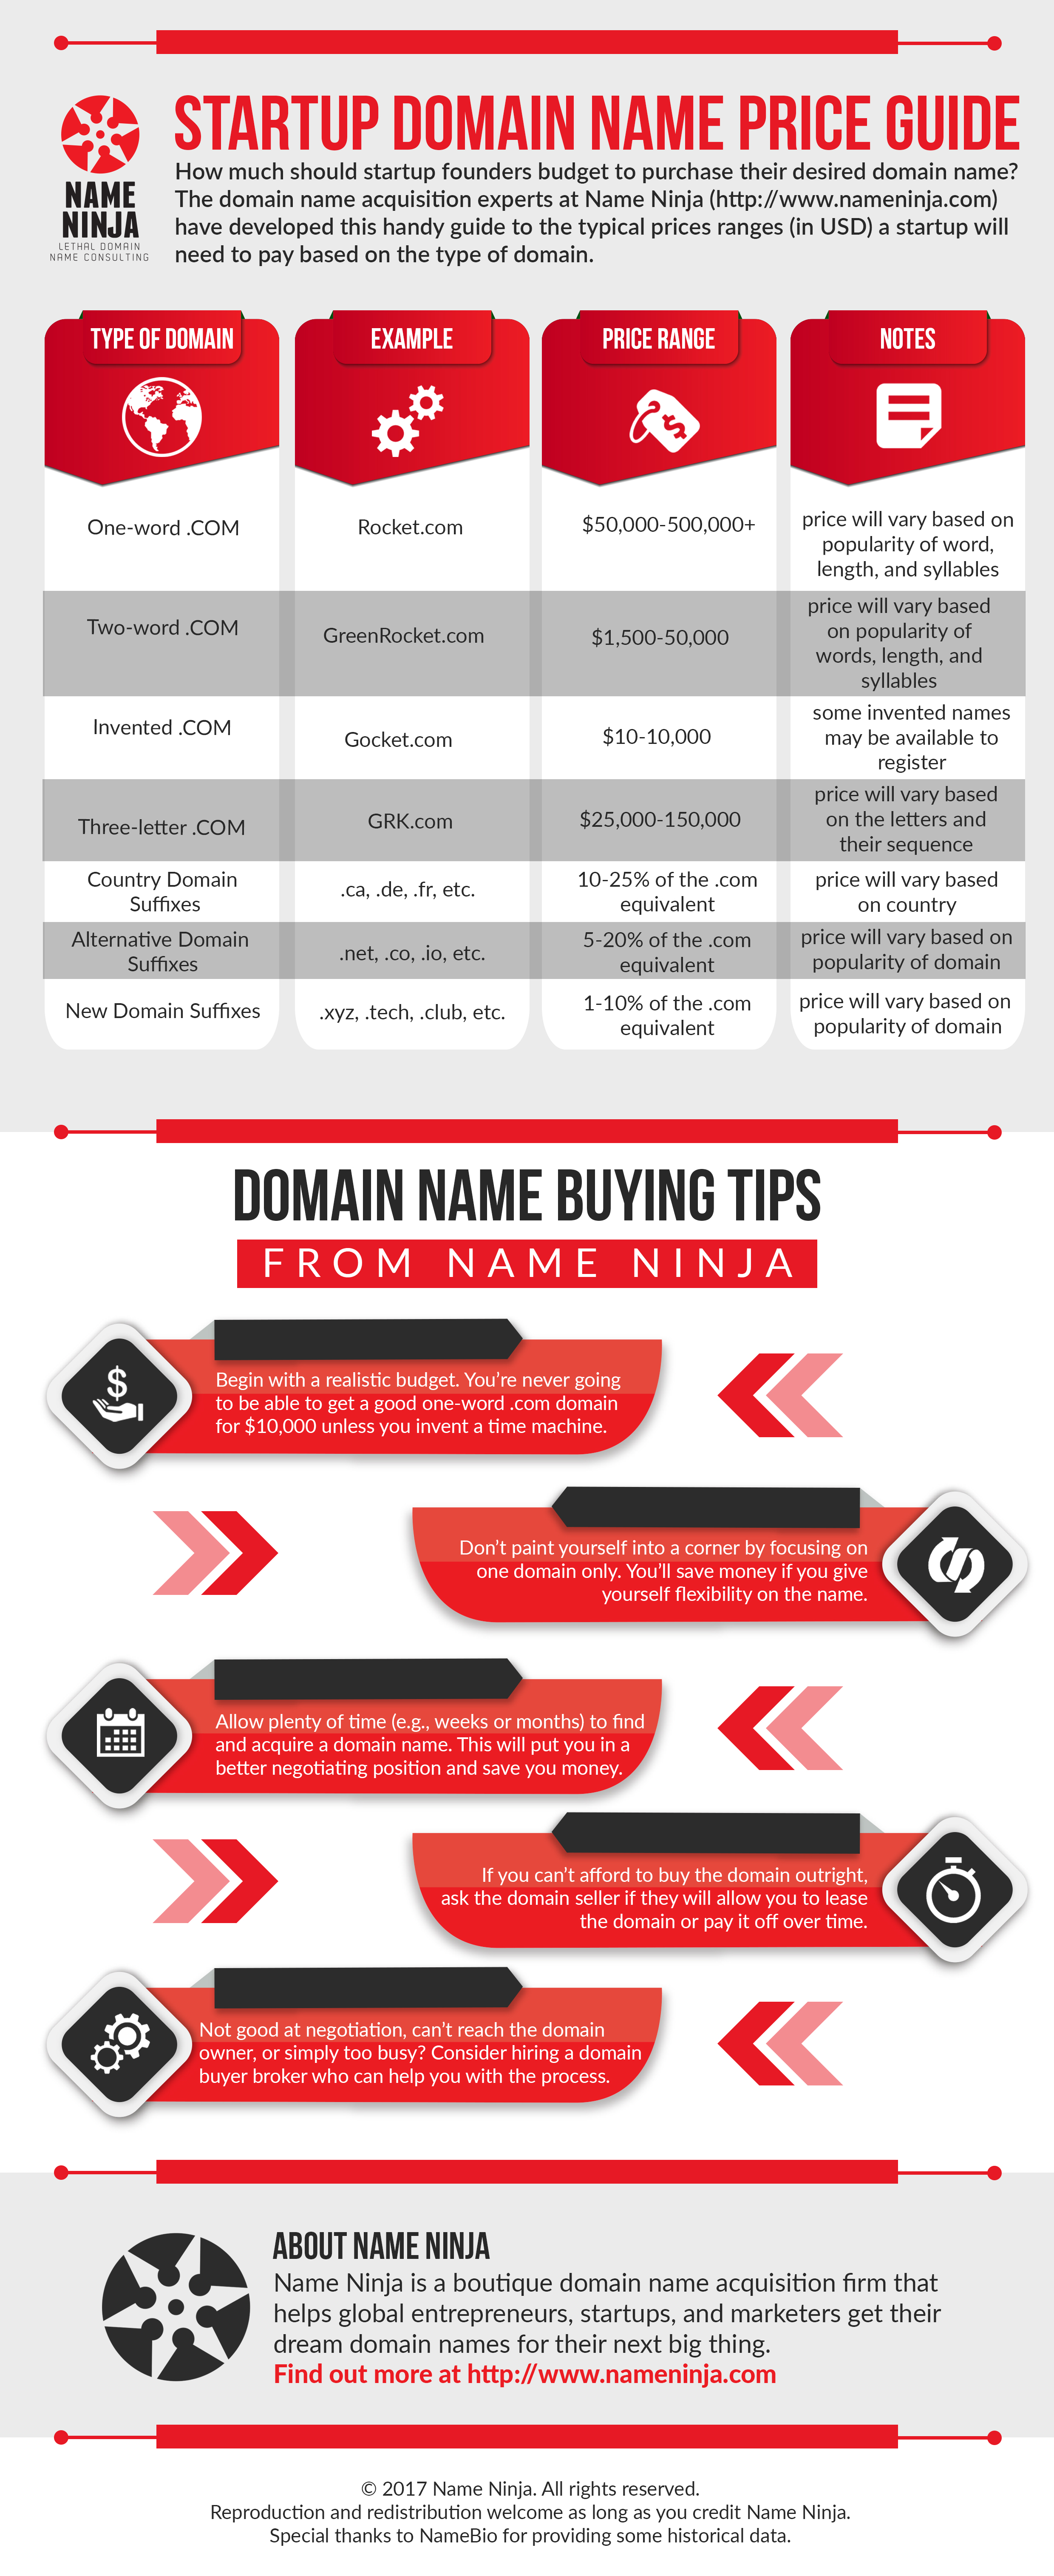 The Startup Domain Name Price Guide from Name Ninja